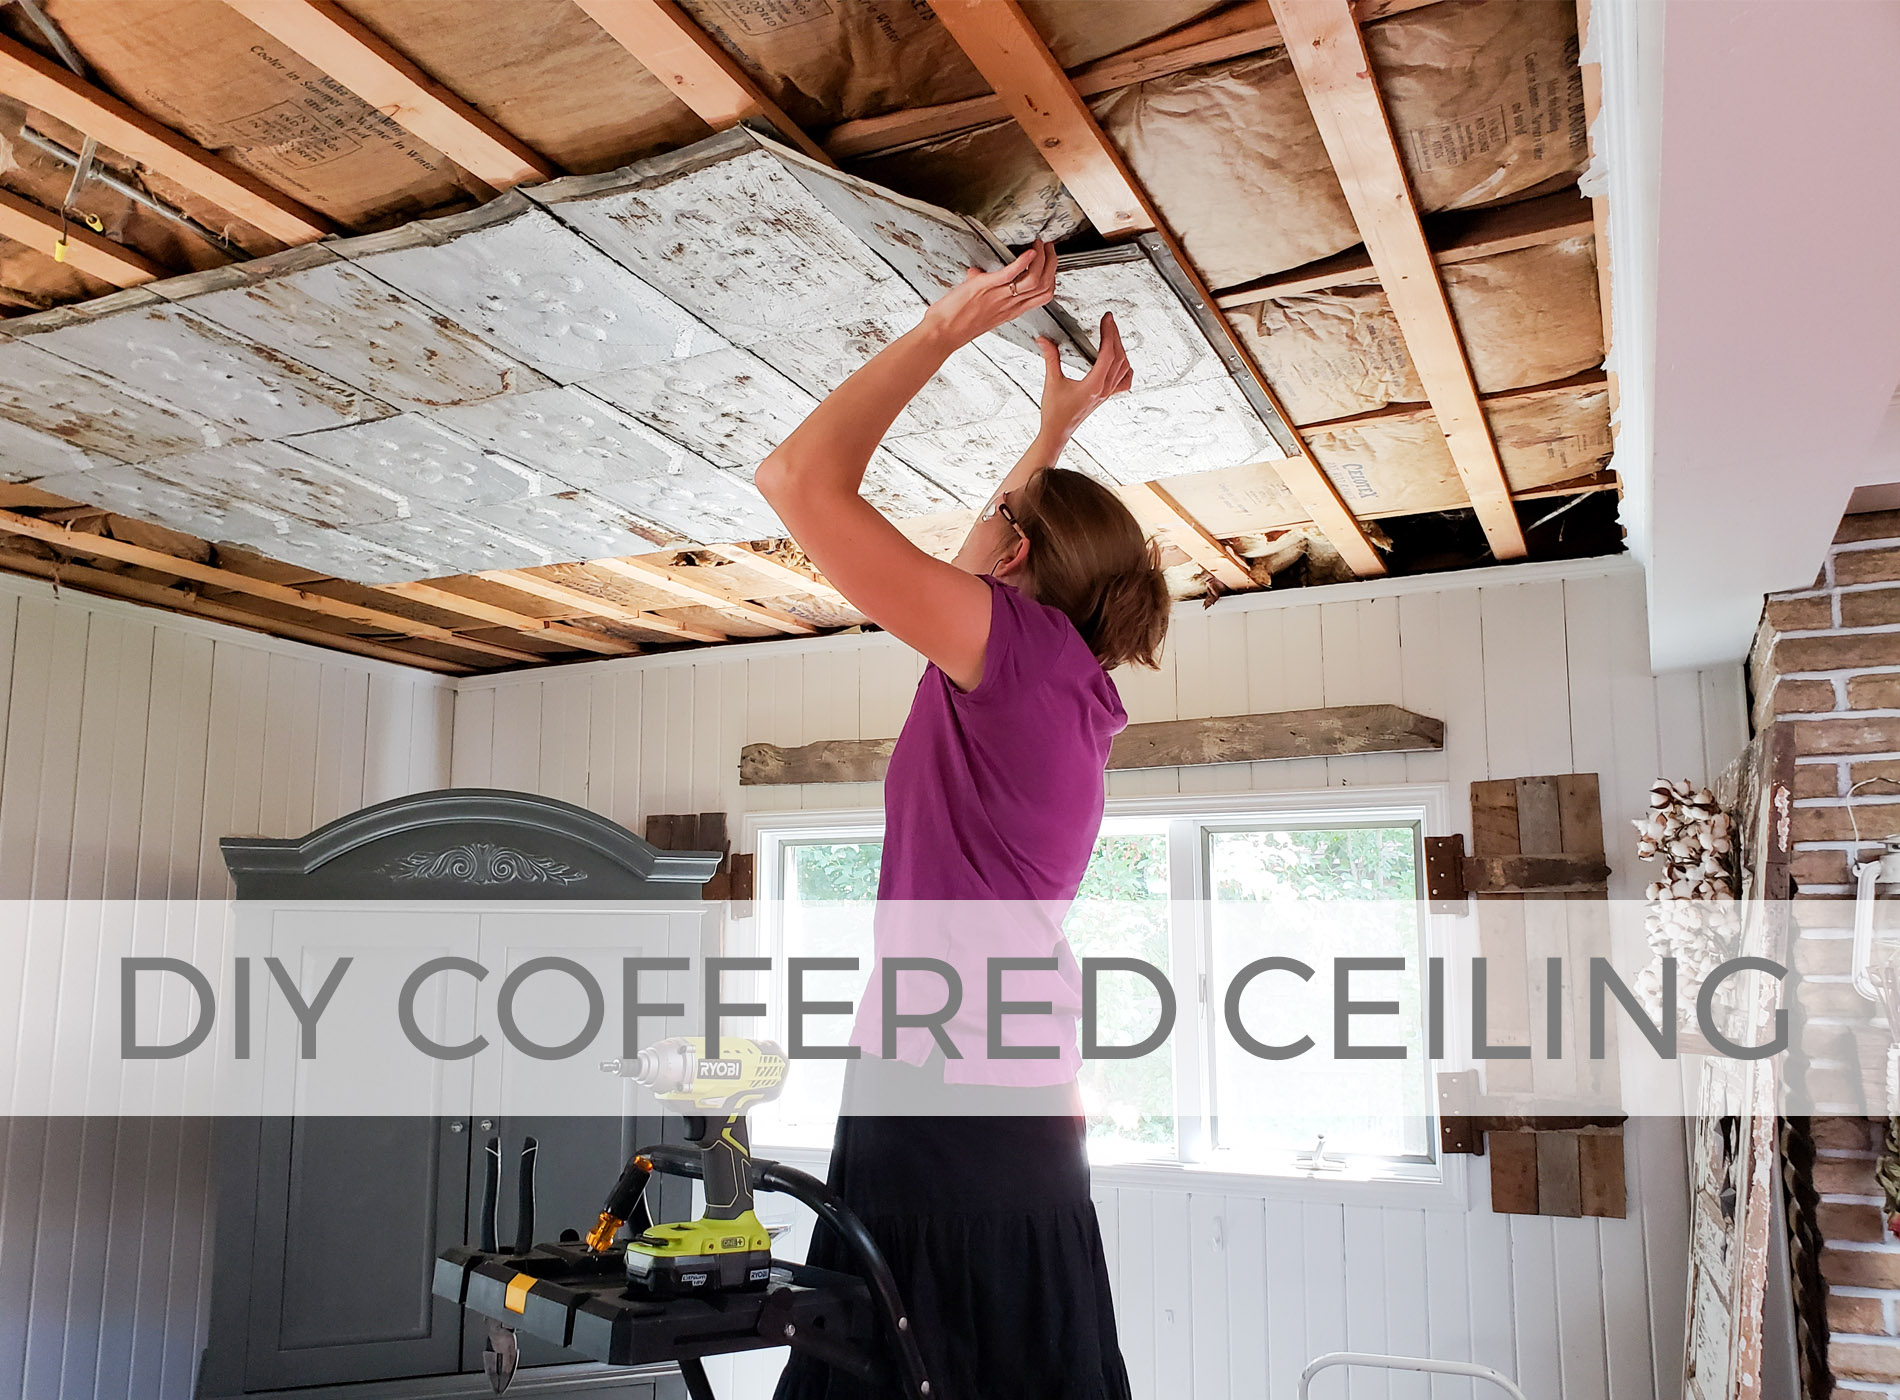 Check out this DIY coffered ceiling with antique barn roof tiles by Larissa of Prodigal Pieces | prodigalpieces.com #prodigalpieces